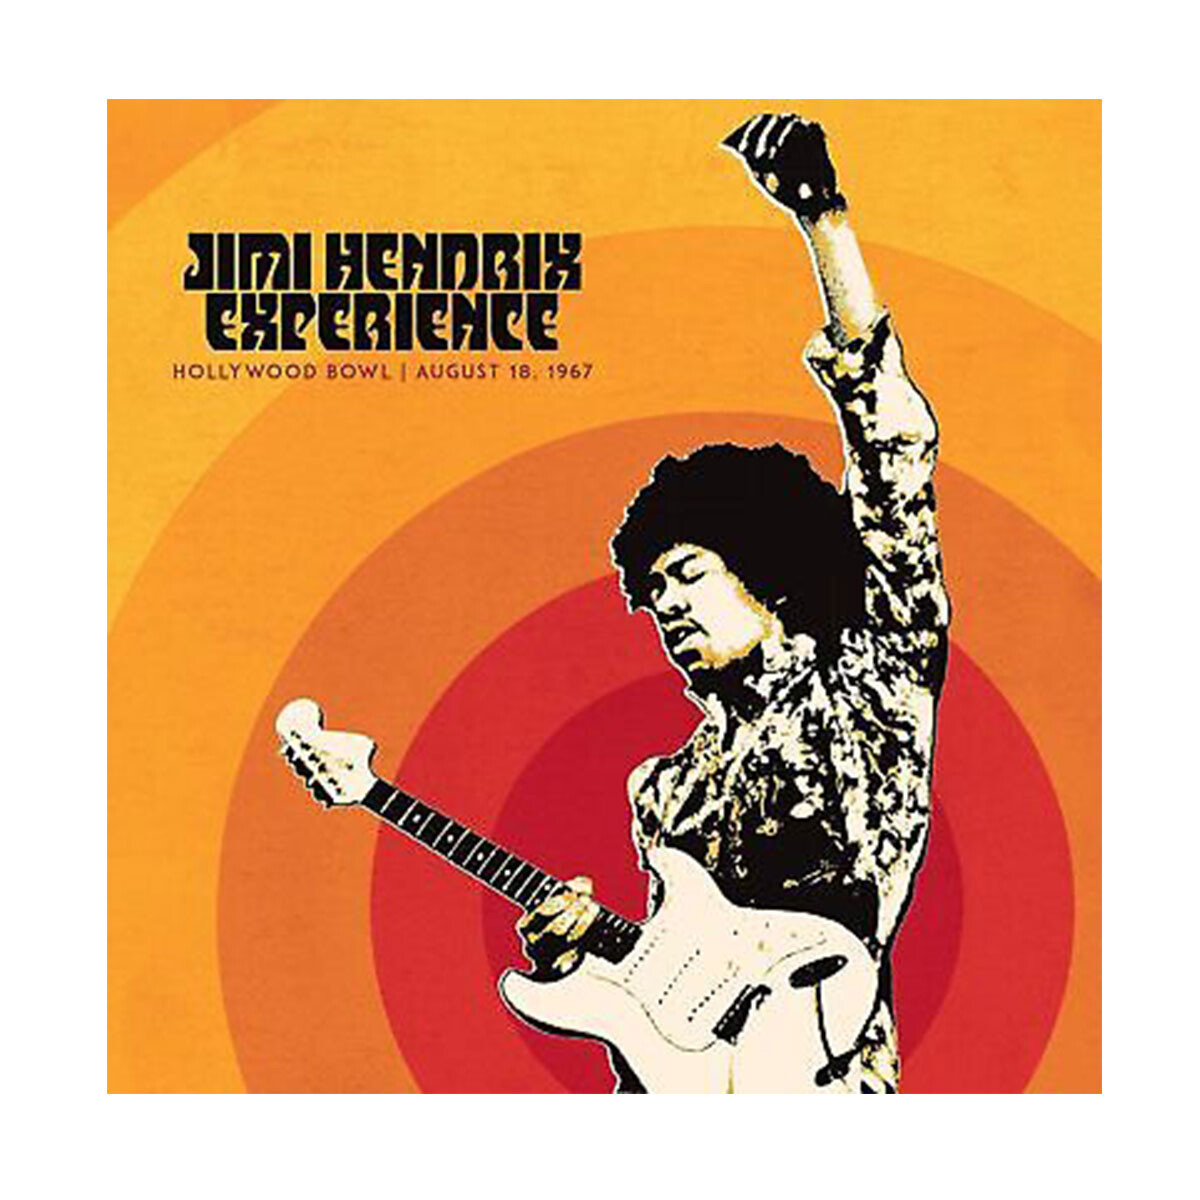 Hendrix,jimi / Live At The Hollywood Bowl: August 18, 1967 - Lp 